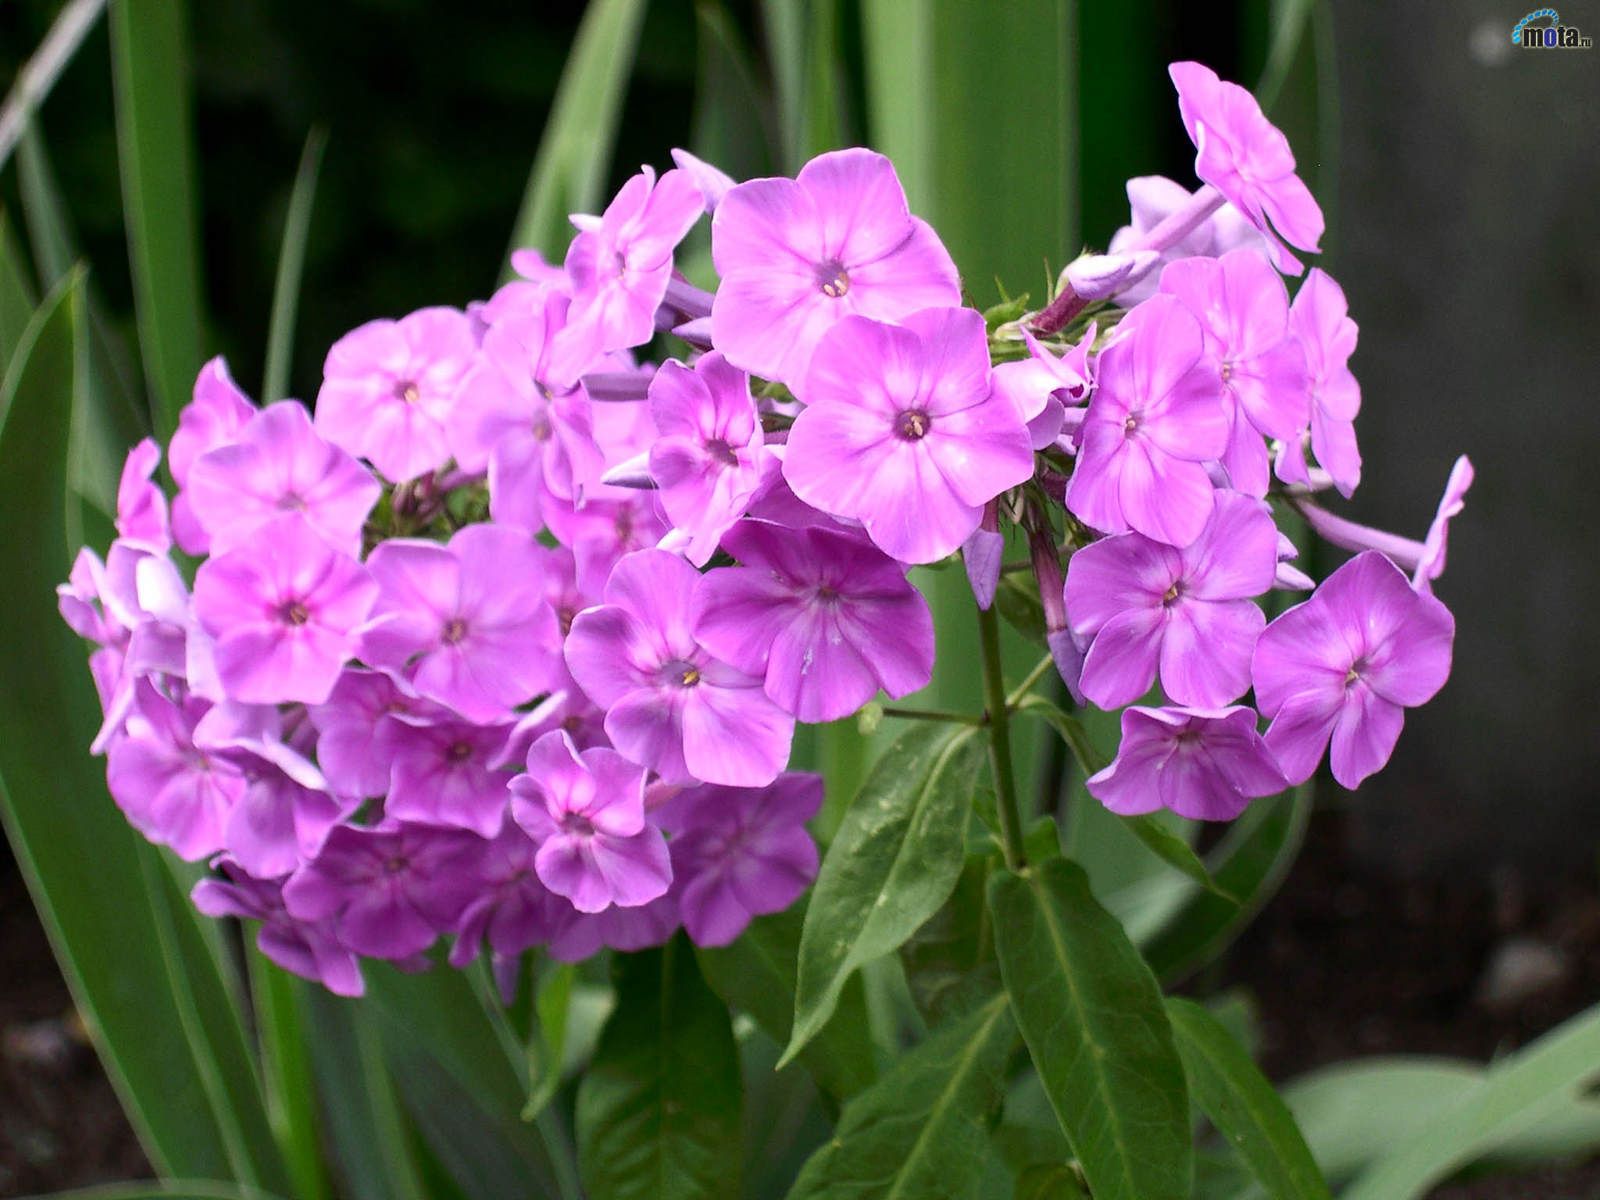 Related Wallpaper Flowers Pink Hydrangea This